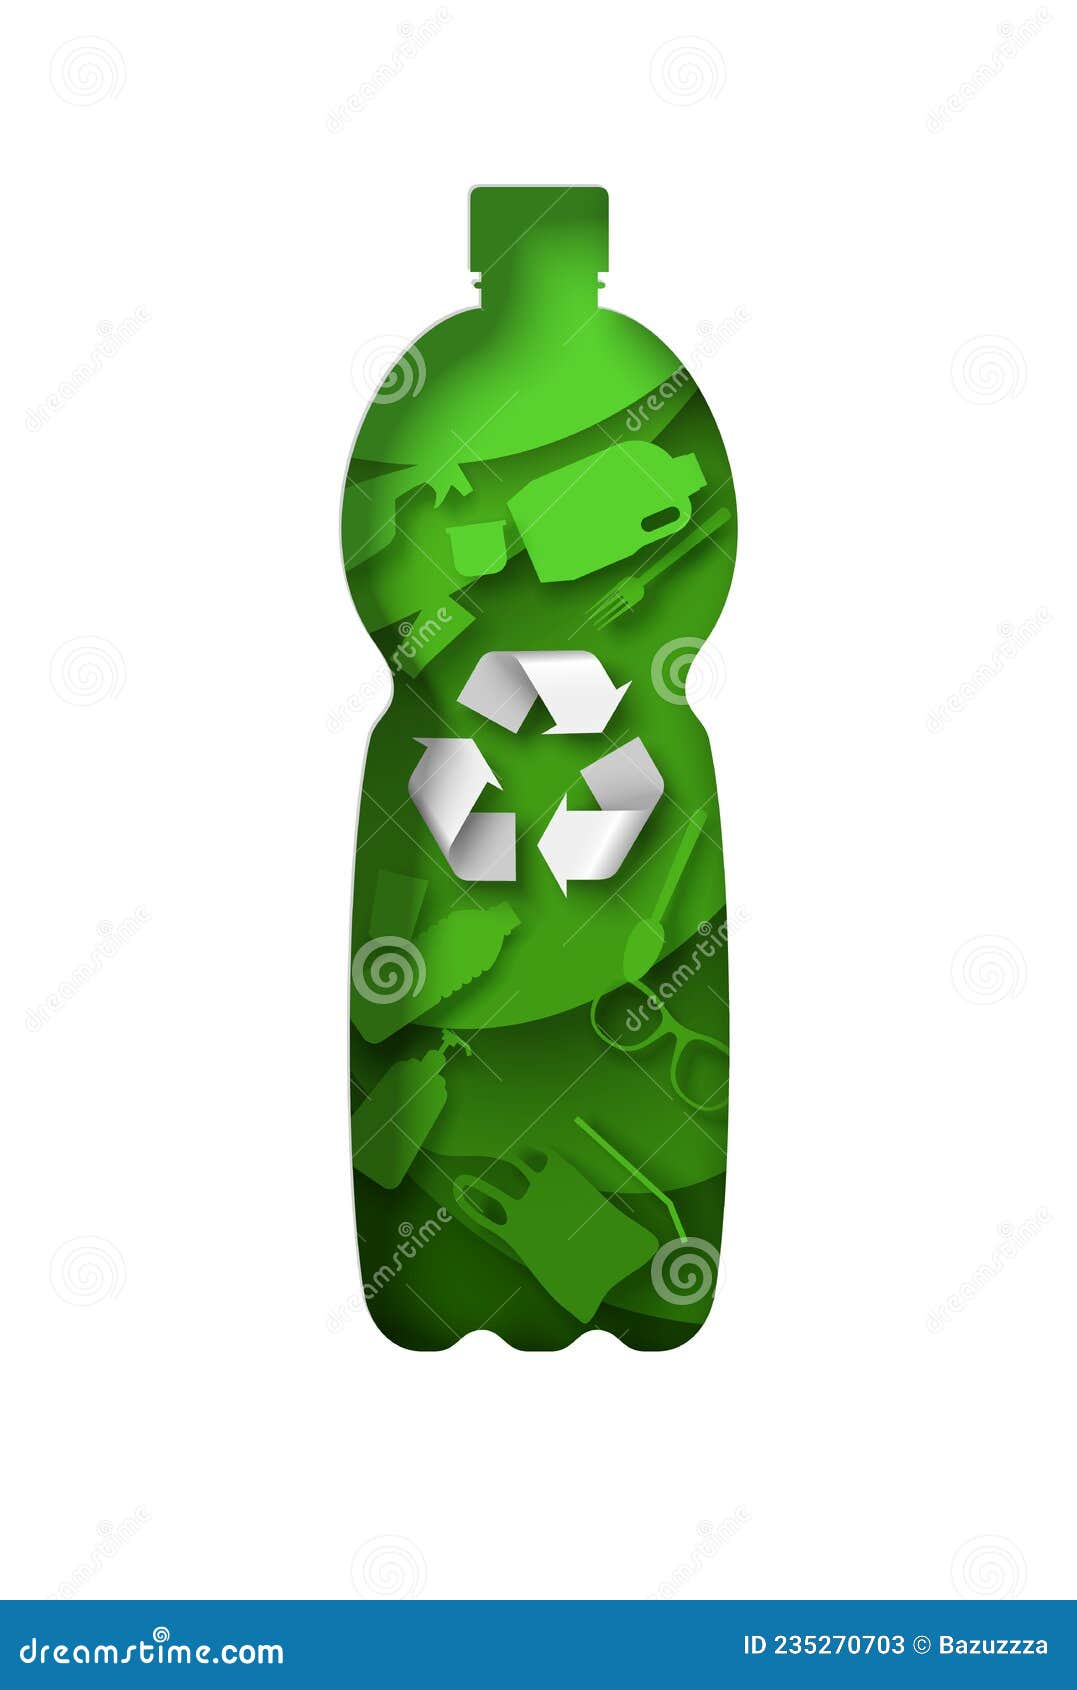 Recycle Plastic Bottles 3D Illustration Download In PNG,, 50% OFF